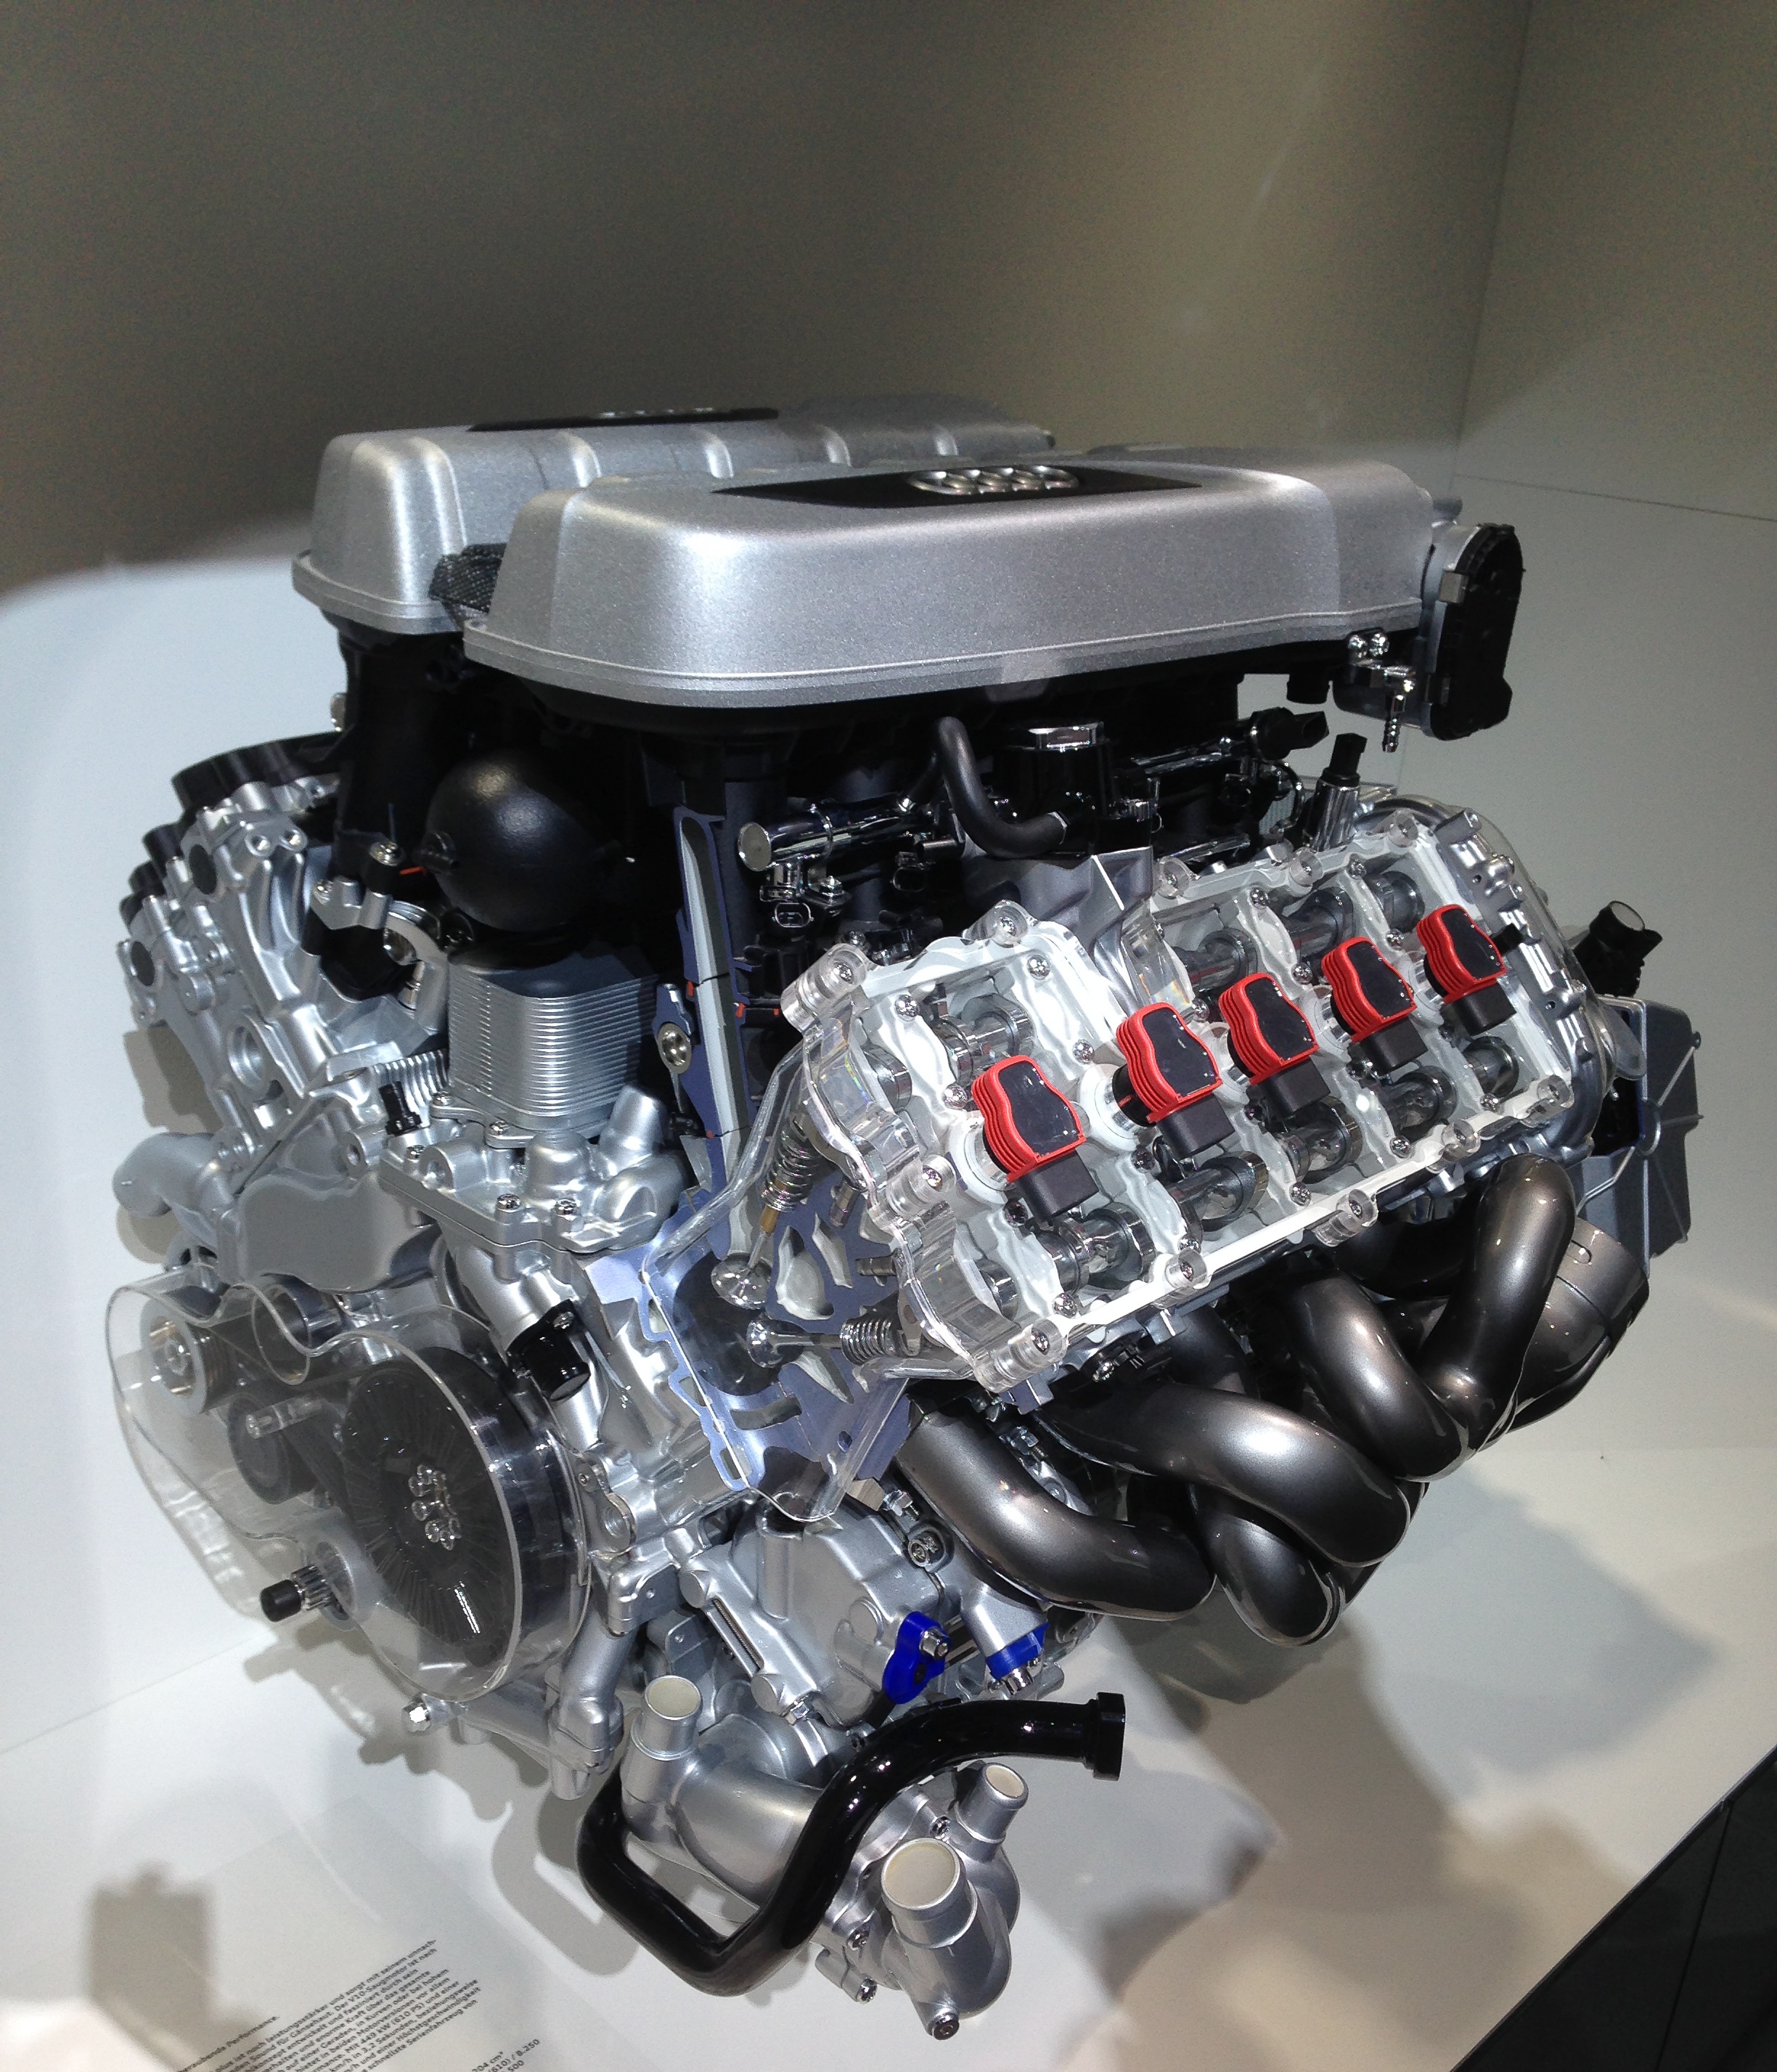 The cylinders of a car engine free image download